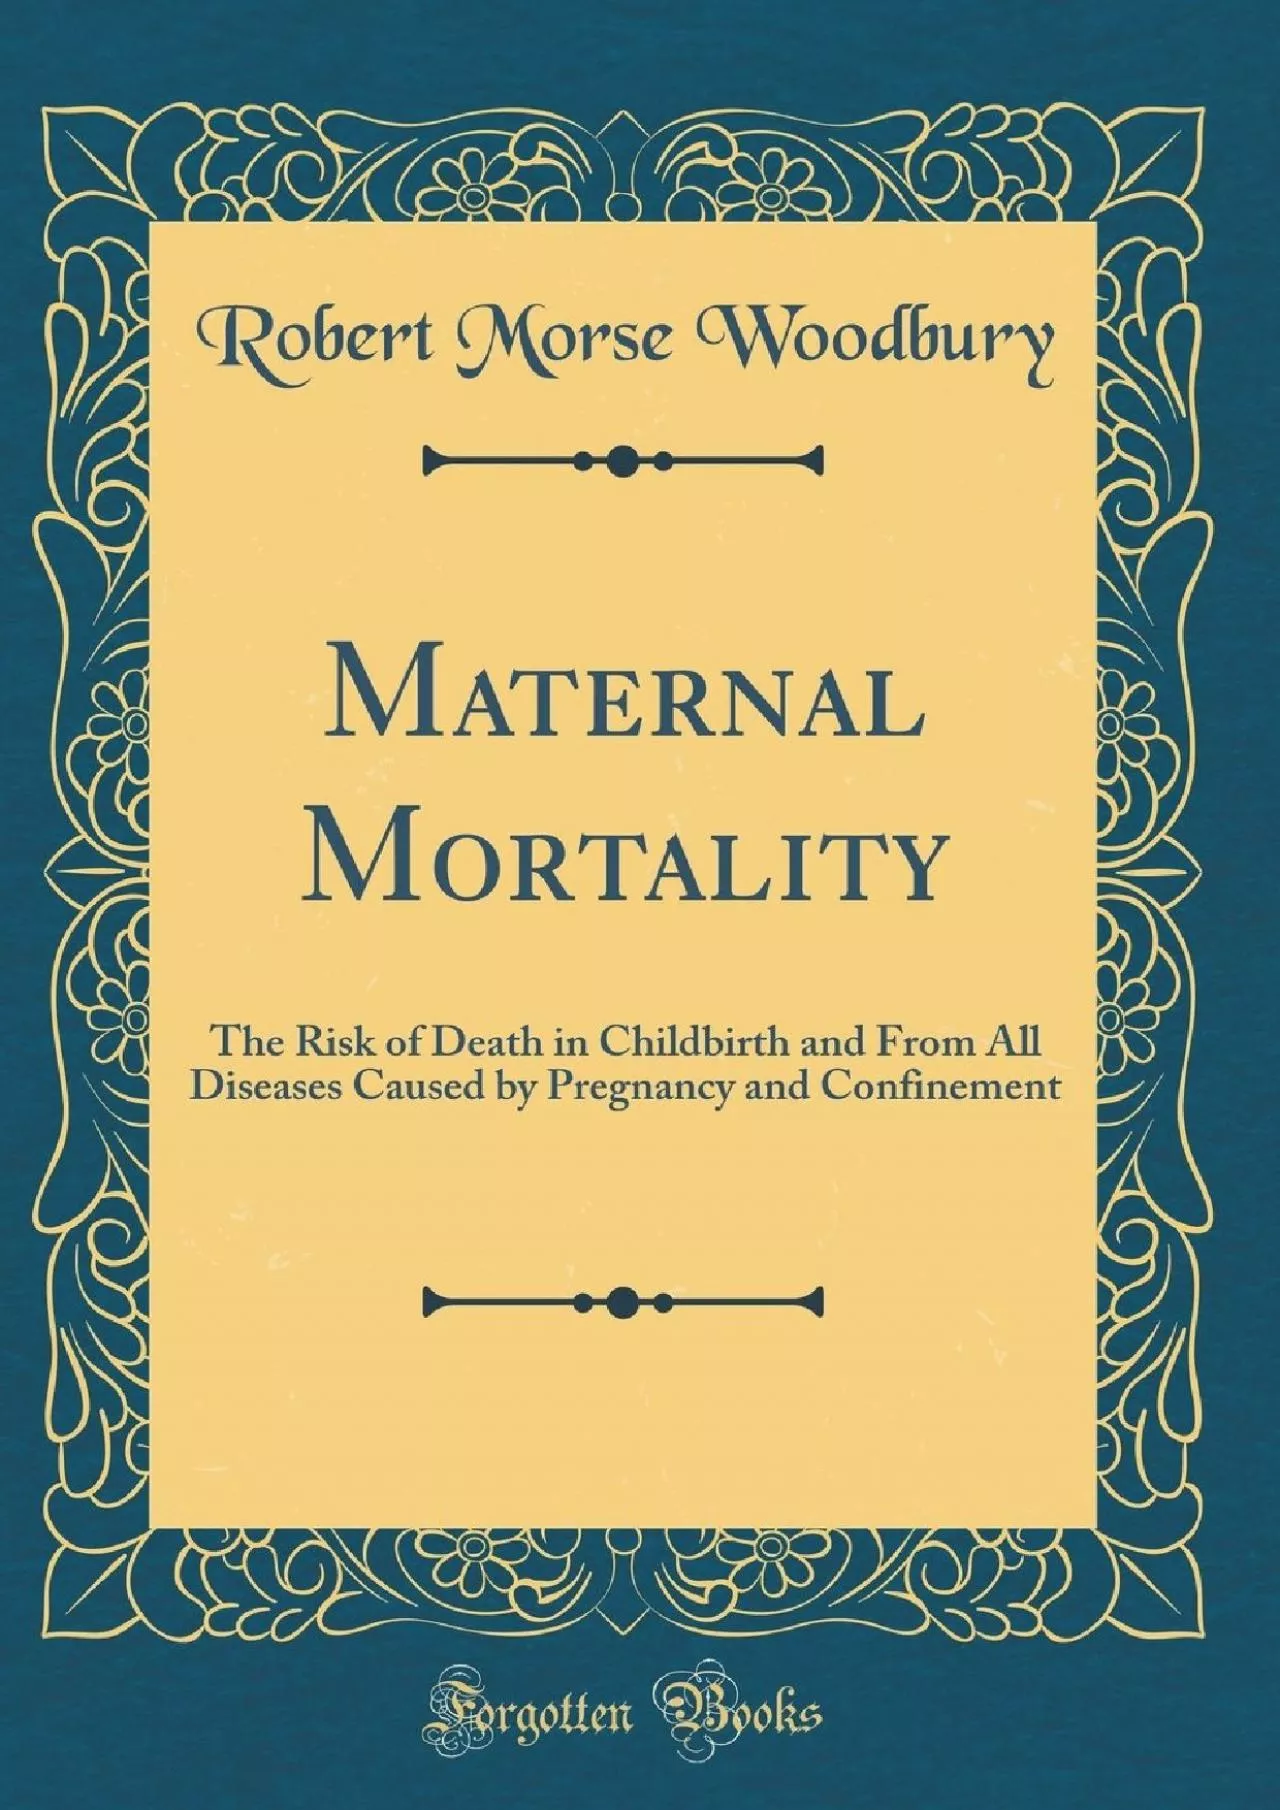 (EBOOK)-Maternal Mortality: The Risk of Death in Childbirth and from All Diseases Caused